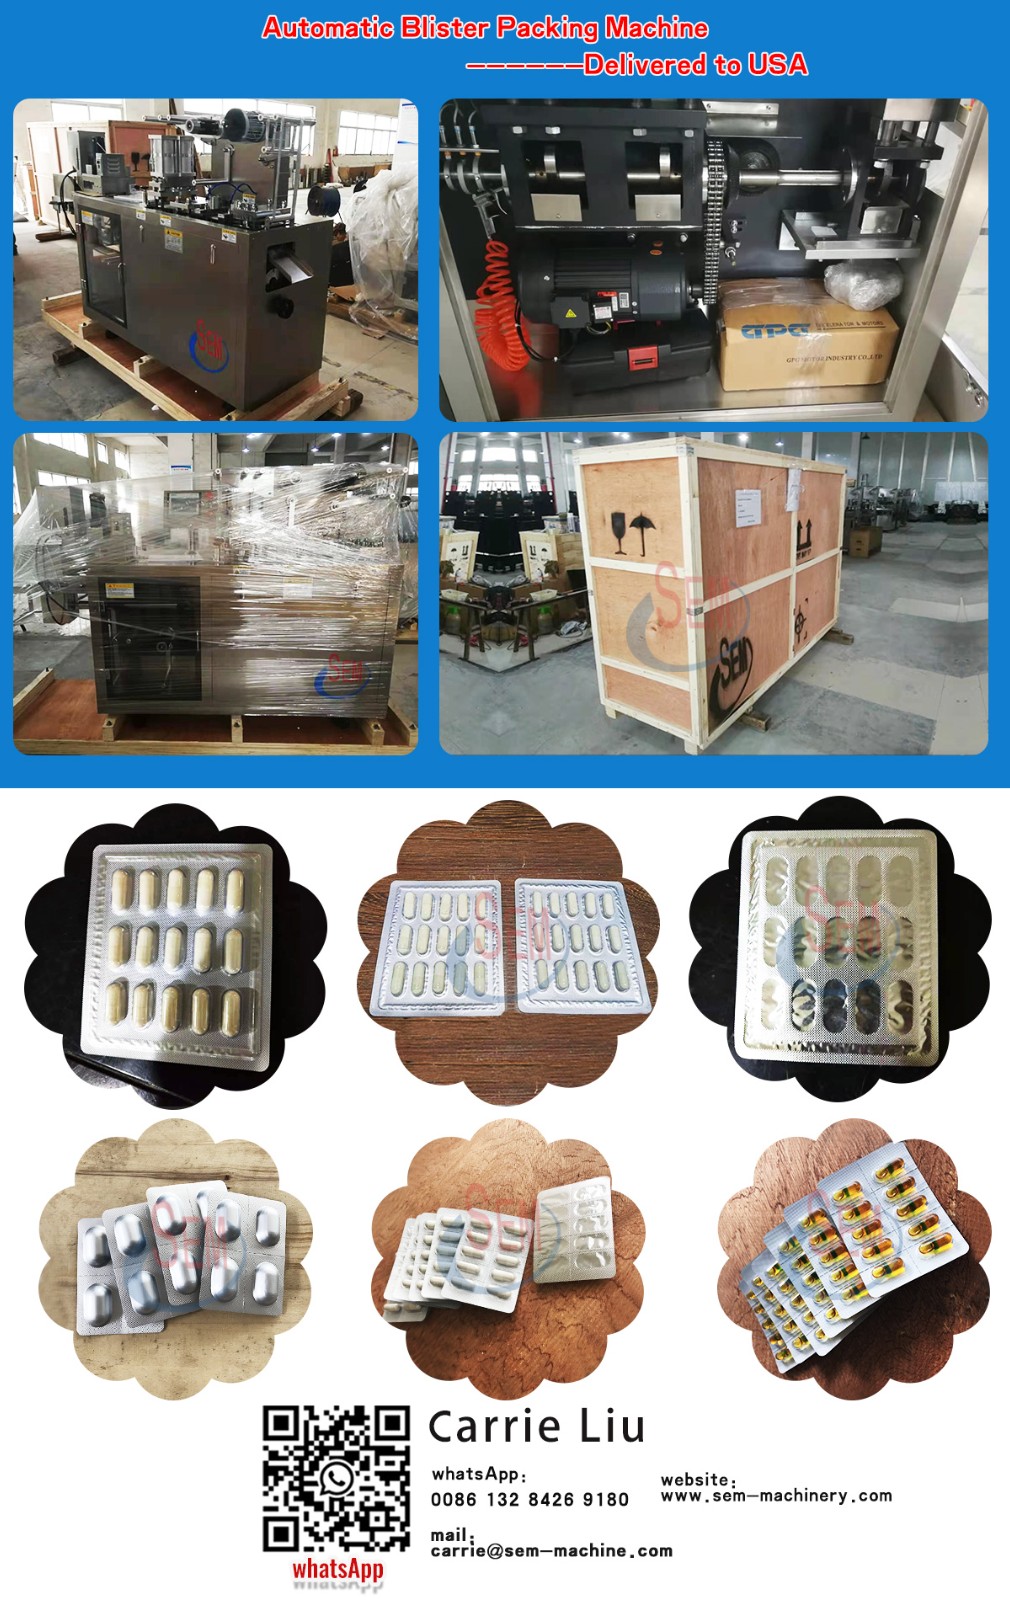 The full-automatic thermoforming blister packaging machine is shipped to USA